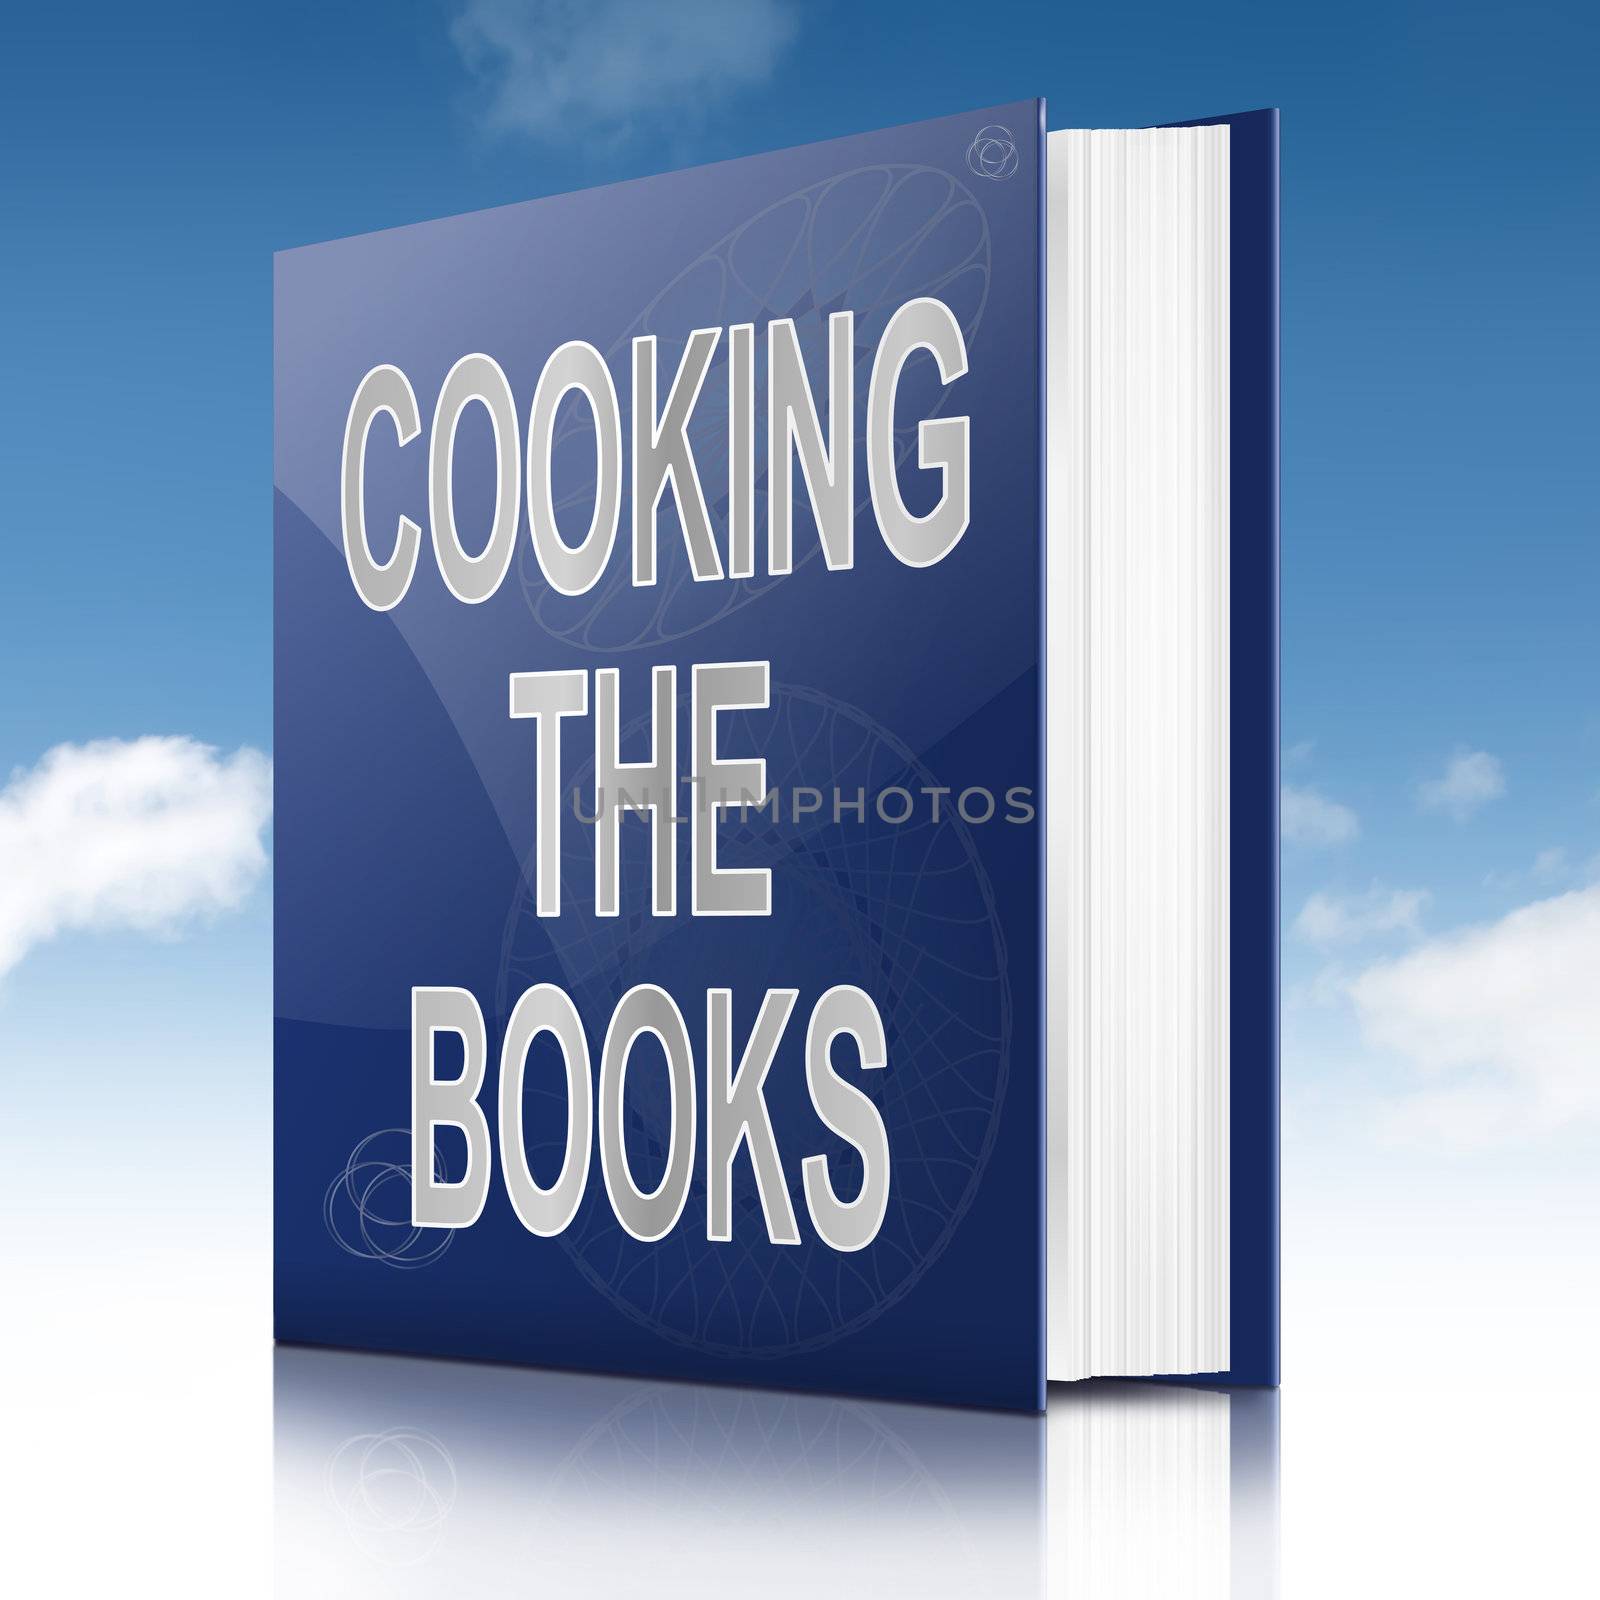 Illustration depicting a book with a cooking the books concept title. Sky background.